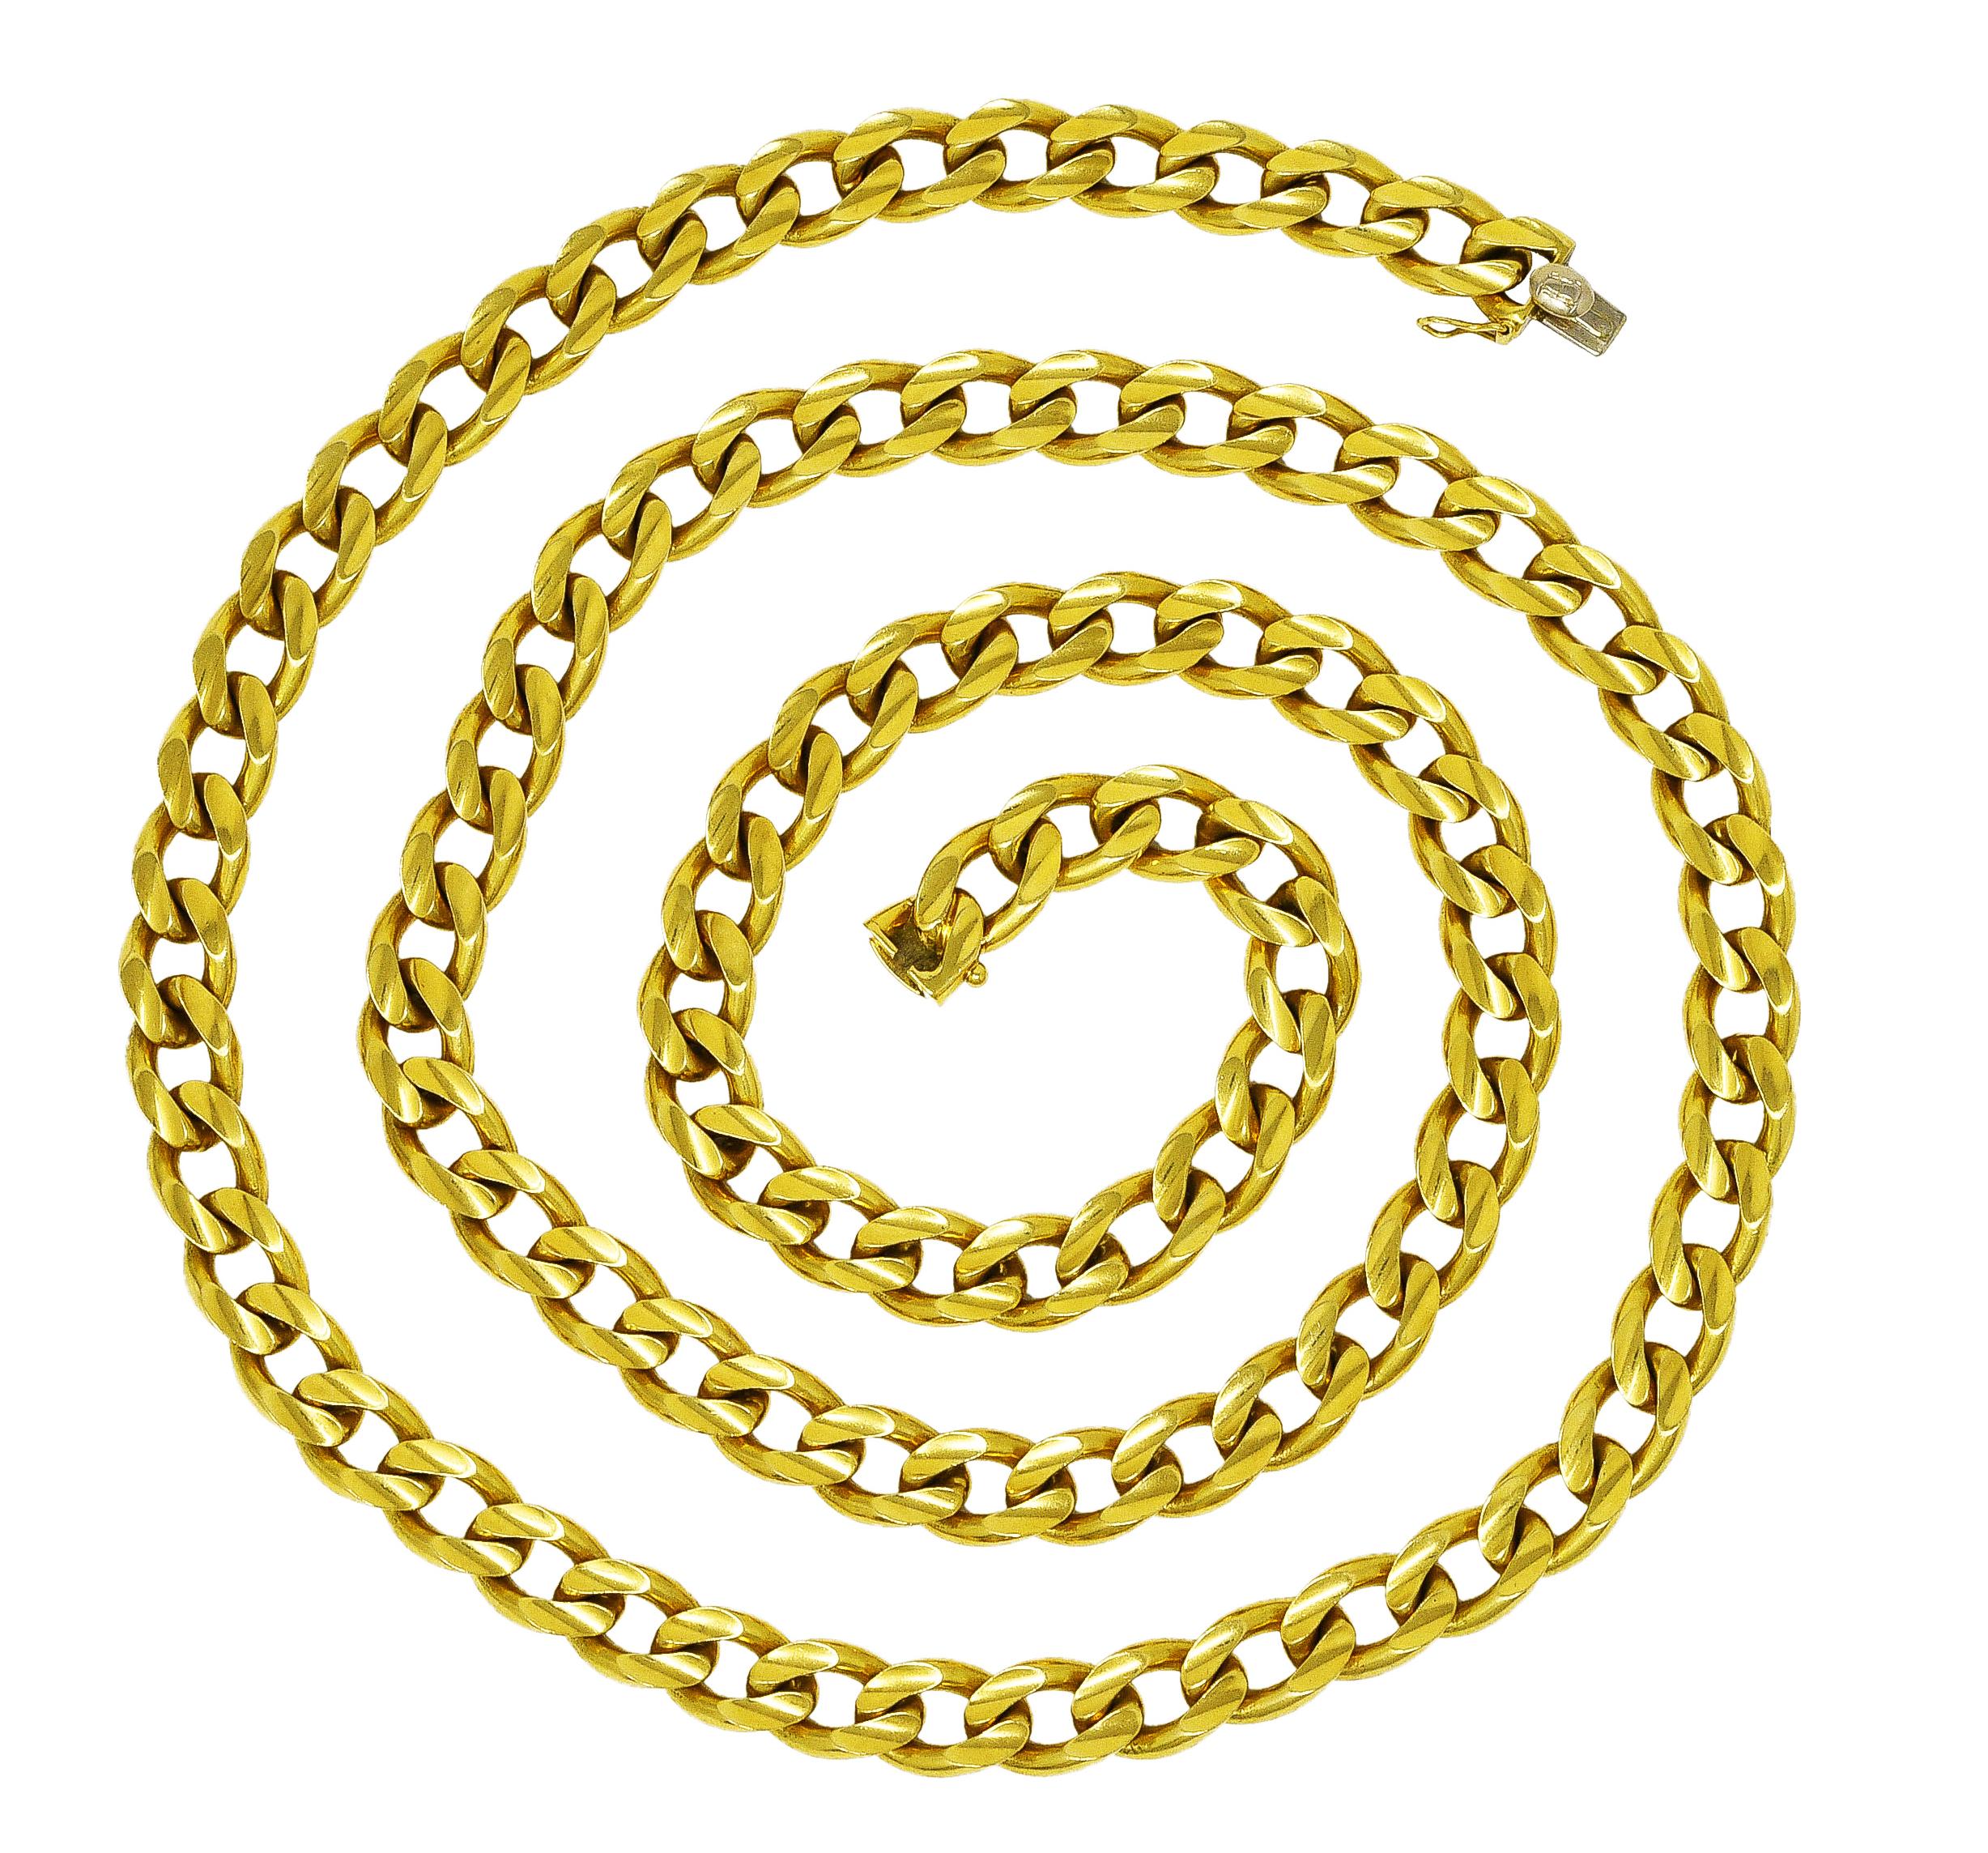 Necklace is designed as a stylized curb link chain. With concave impression on surface of links. Completed by hidden clasp closure with figure eight safety. Stamped 750 for 18 karat gold. Fully signed with maker's mark for Bvlgari. With assay marks